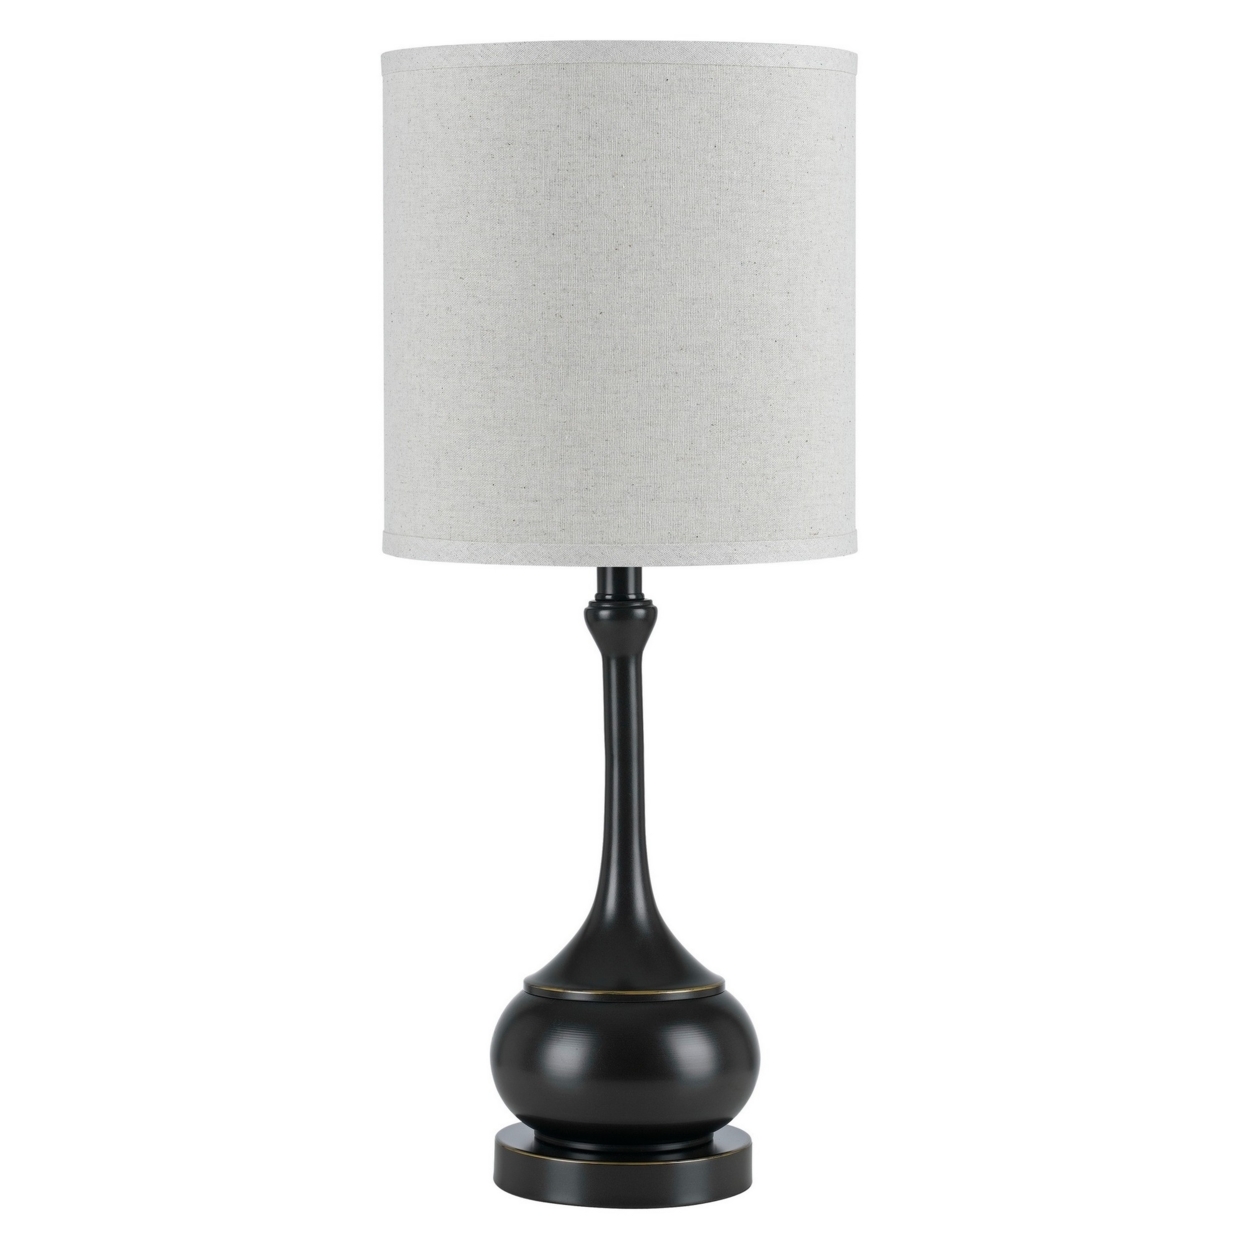 Elongated Bellied Shape Metal Accent Lamp with Drum Shade, Black- Saltoro Sherpi